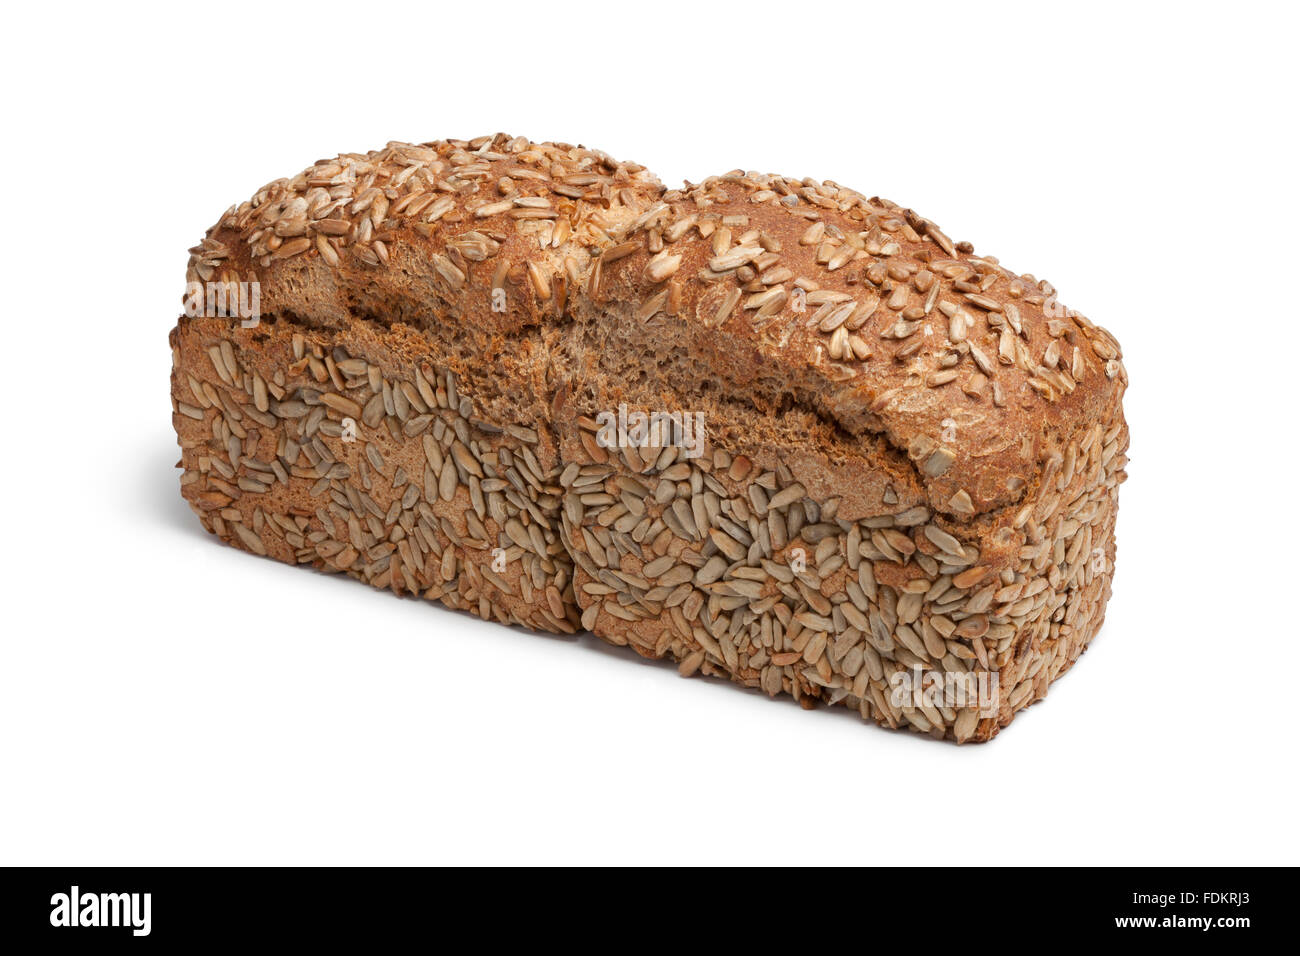 Whole loaf of spelt bread sunflower seeds on white background Stock Photo